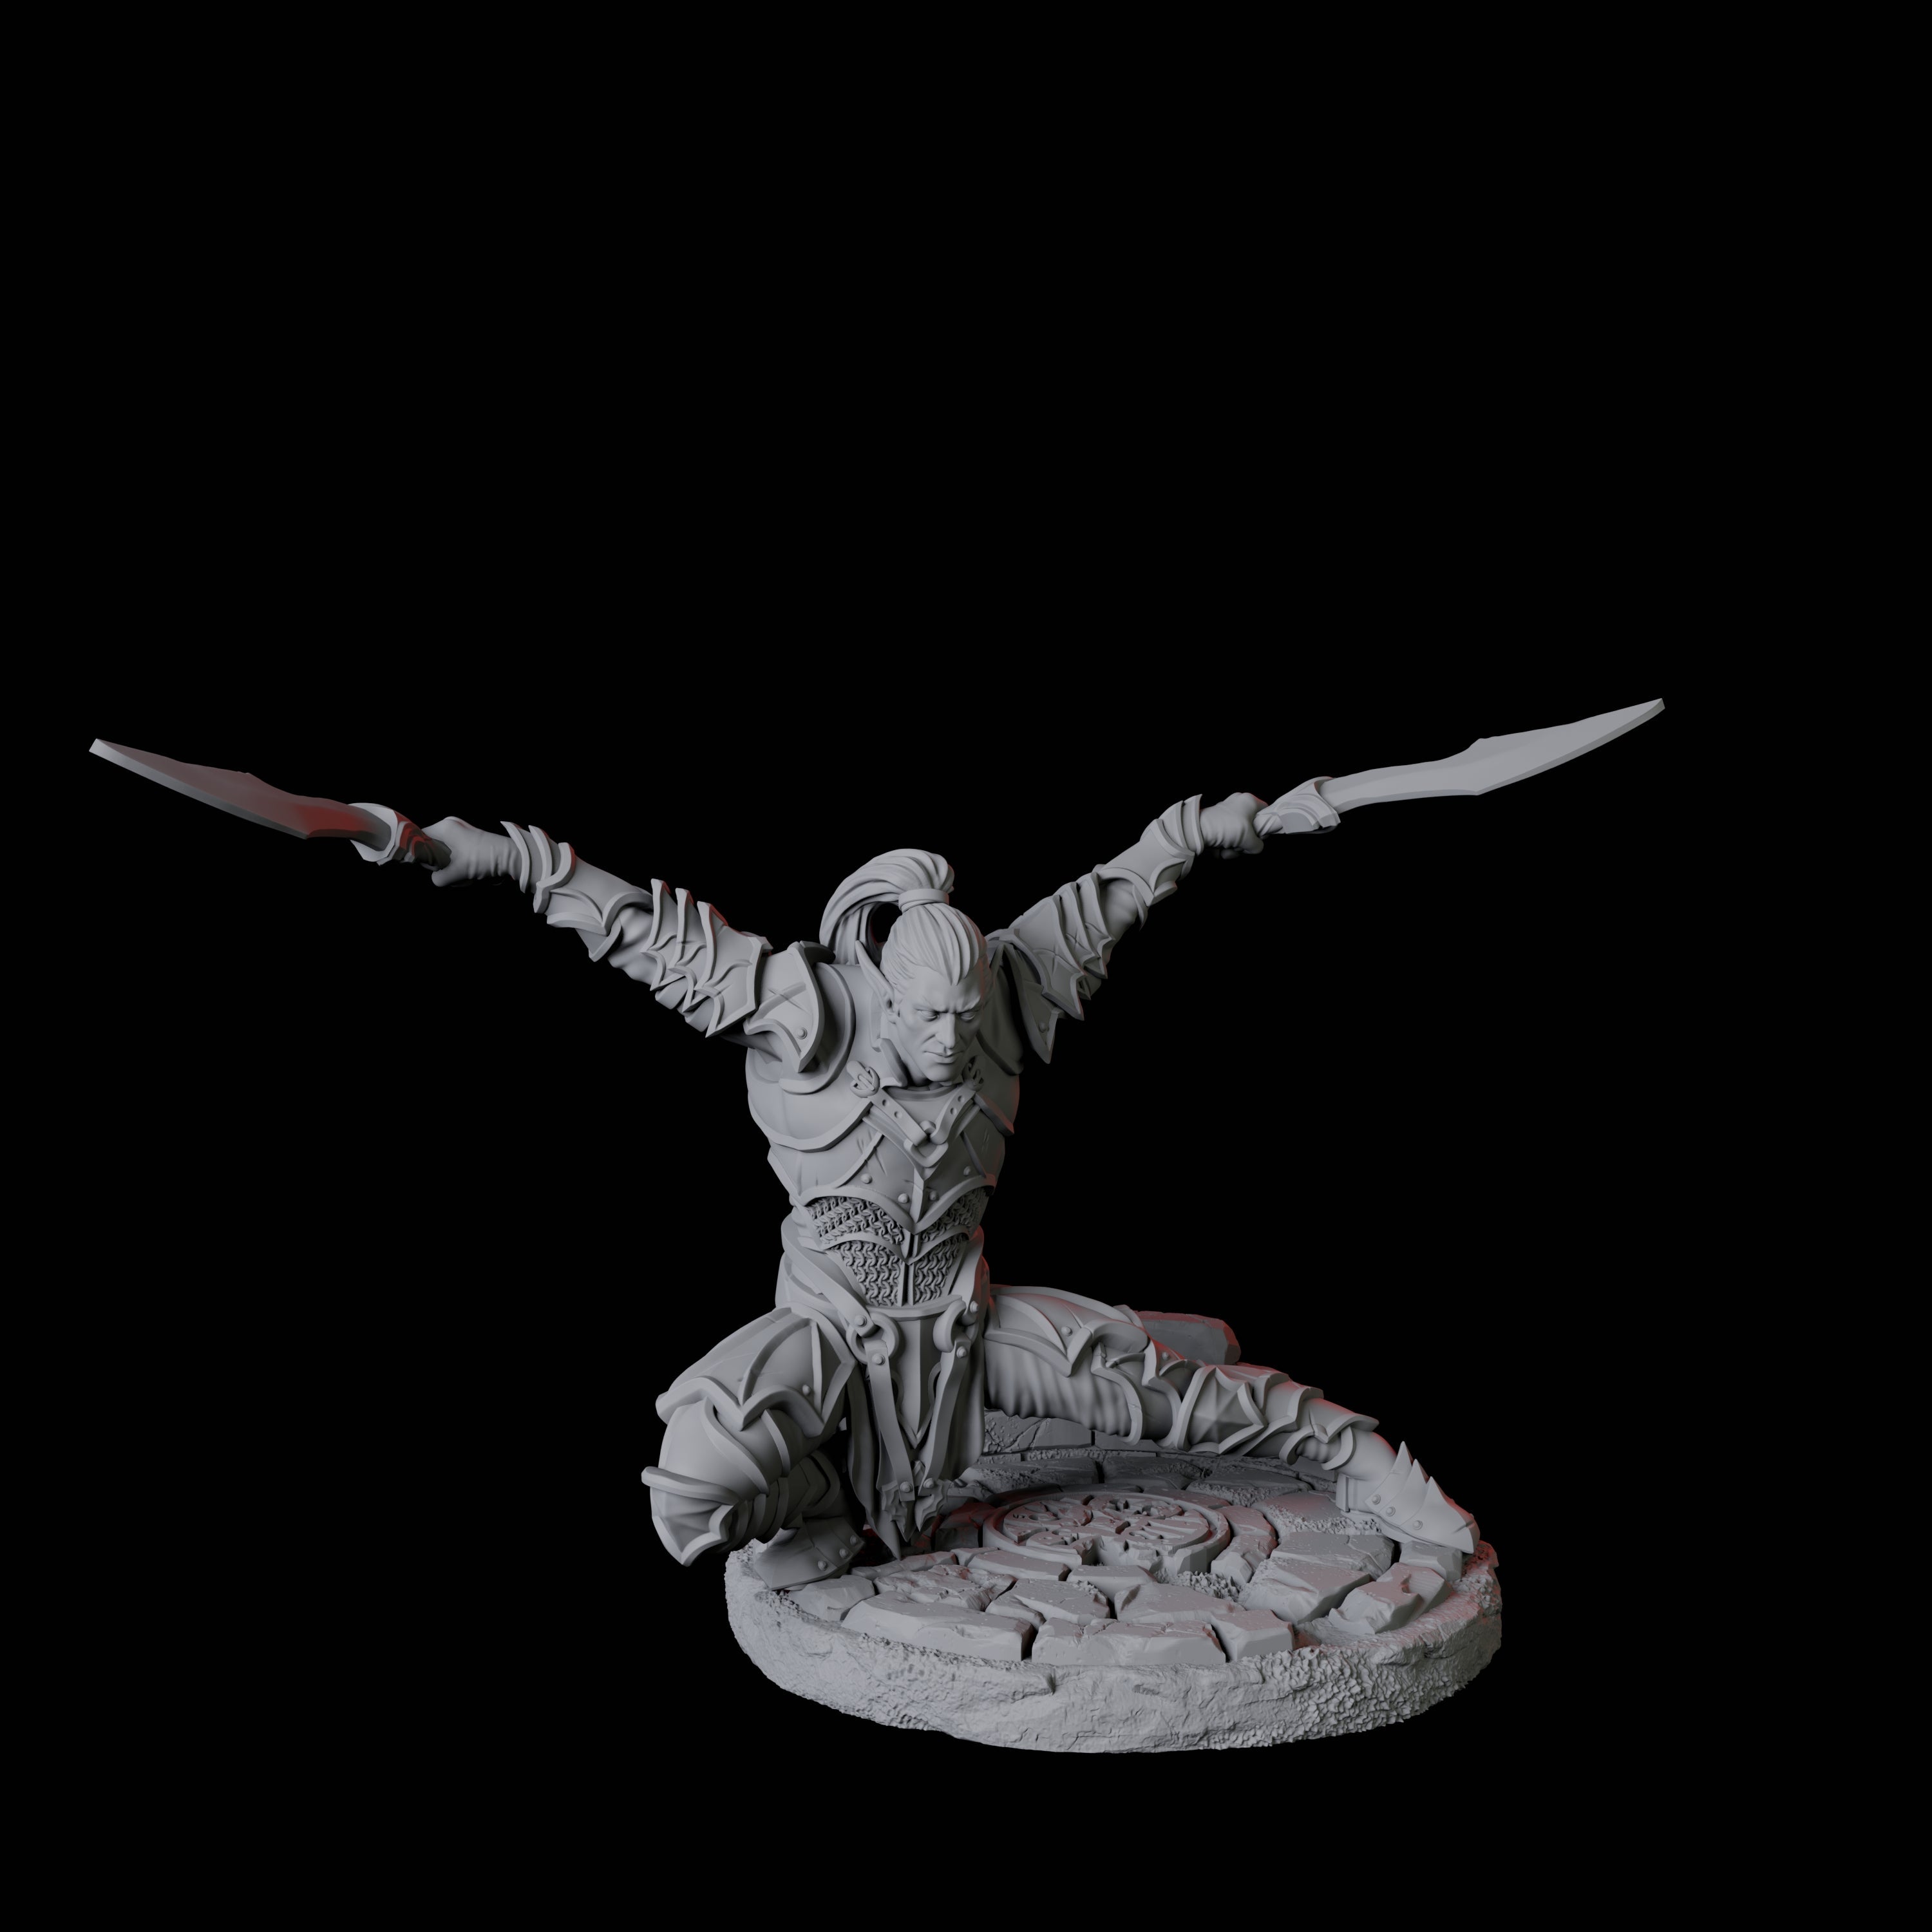 Two Dual Wielding Swordsmen Miniature for Dungeons and Dragons, Pathfinder or other TTRPGs